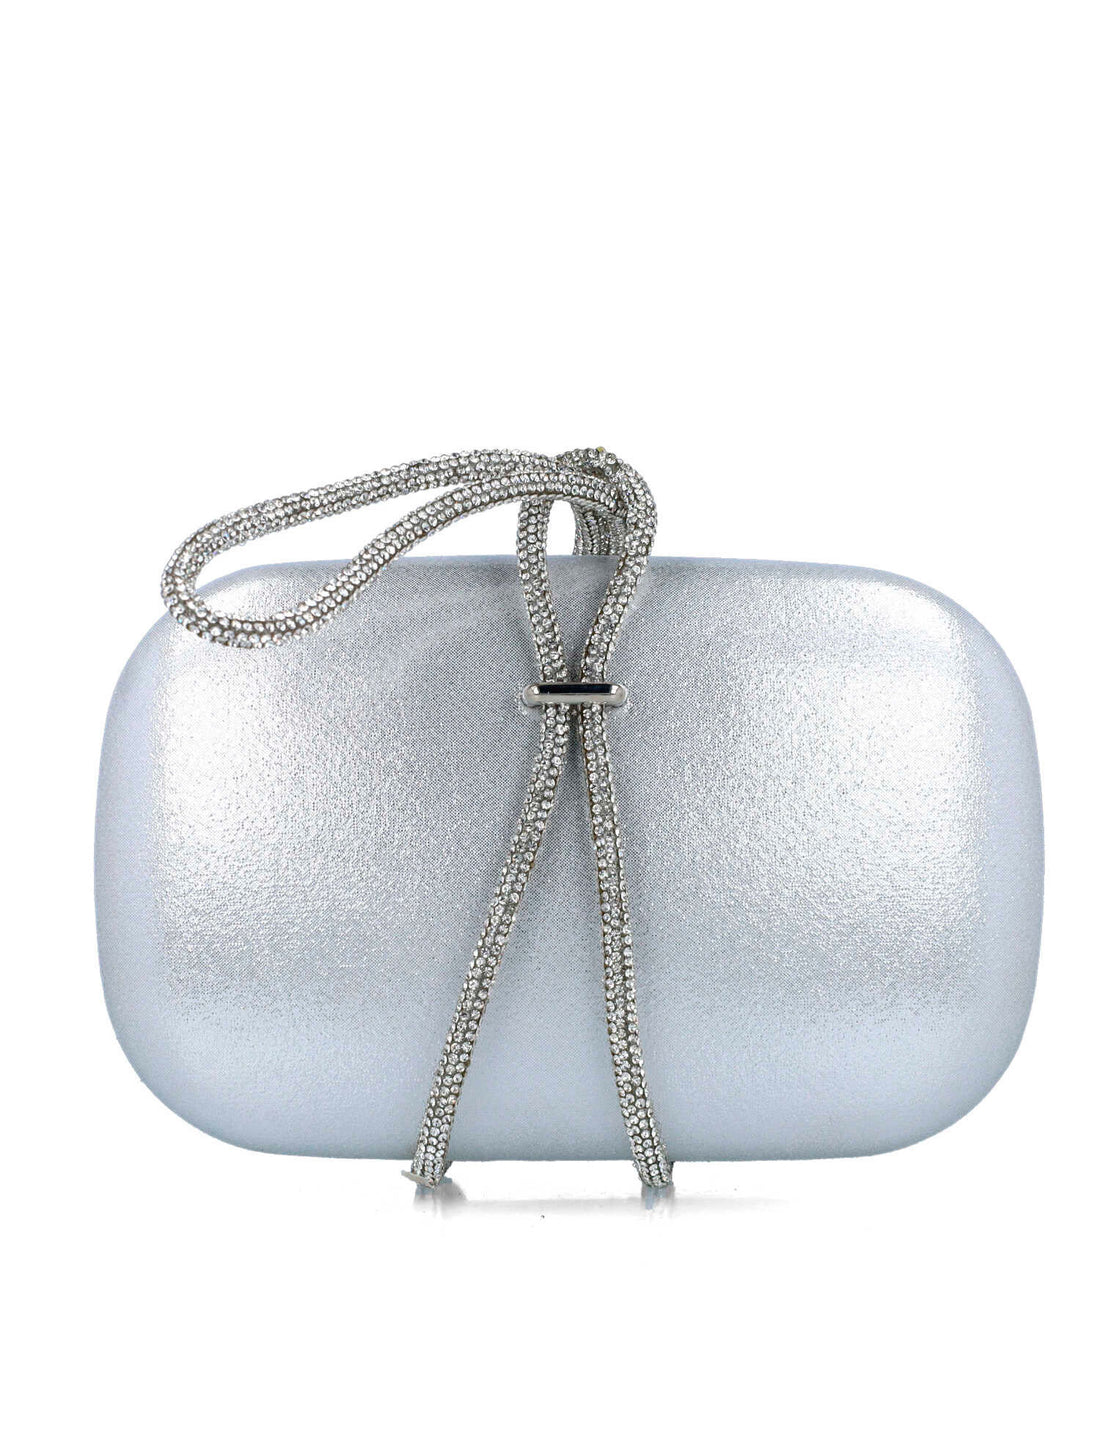 Silver Clutch With Embellished Hand Strap_85499_09_01